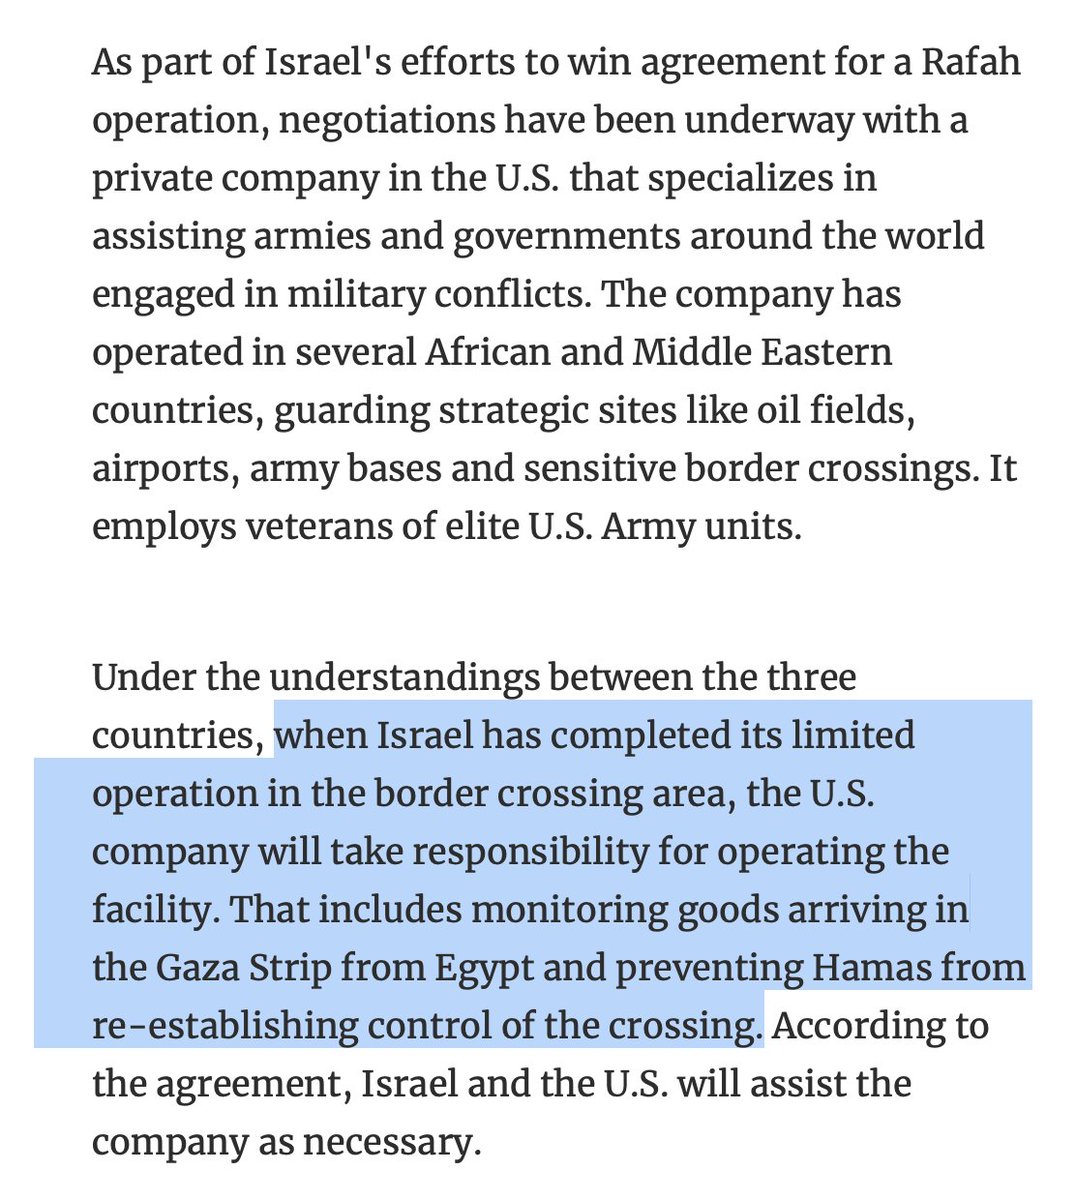 I have a hard time believing Biden & co will sign off on American mercenaries being stationed in Gaza. But the fact it's under consideration shows they think they need *something* there to run the empire but also realize Americans will never accept direct US military involvement.